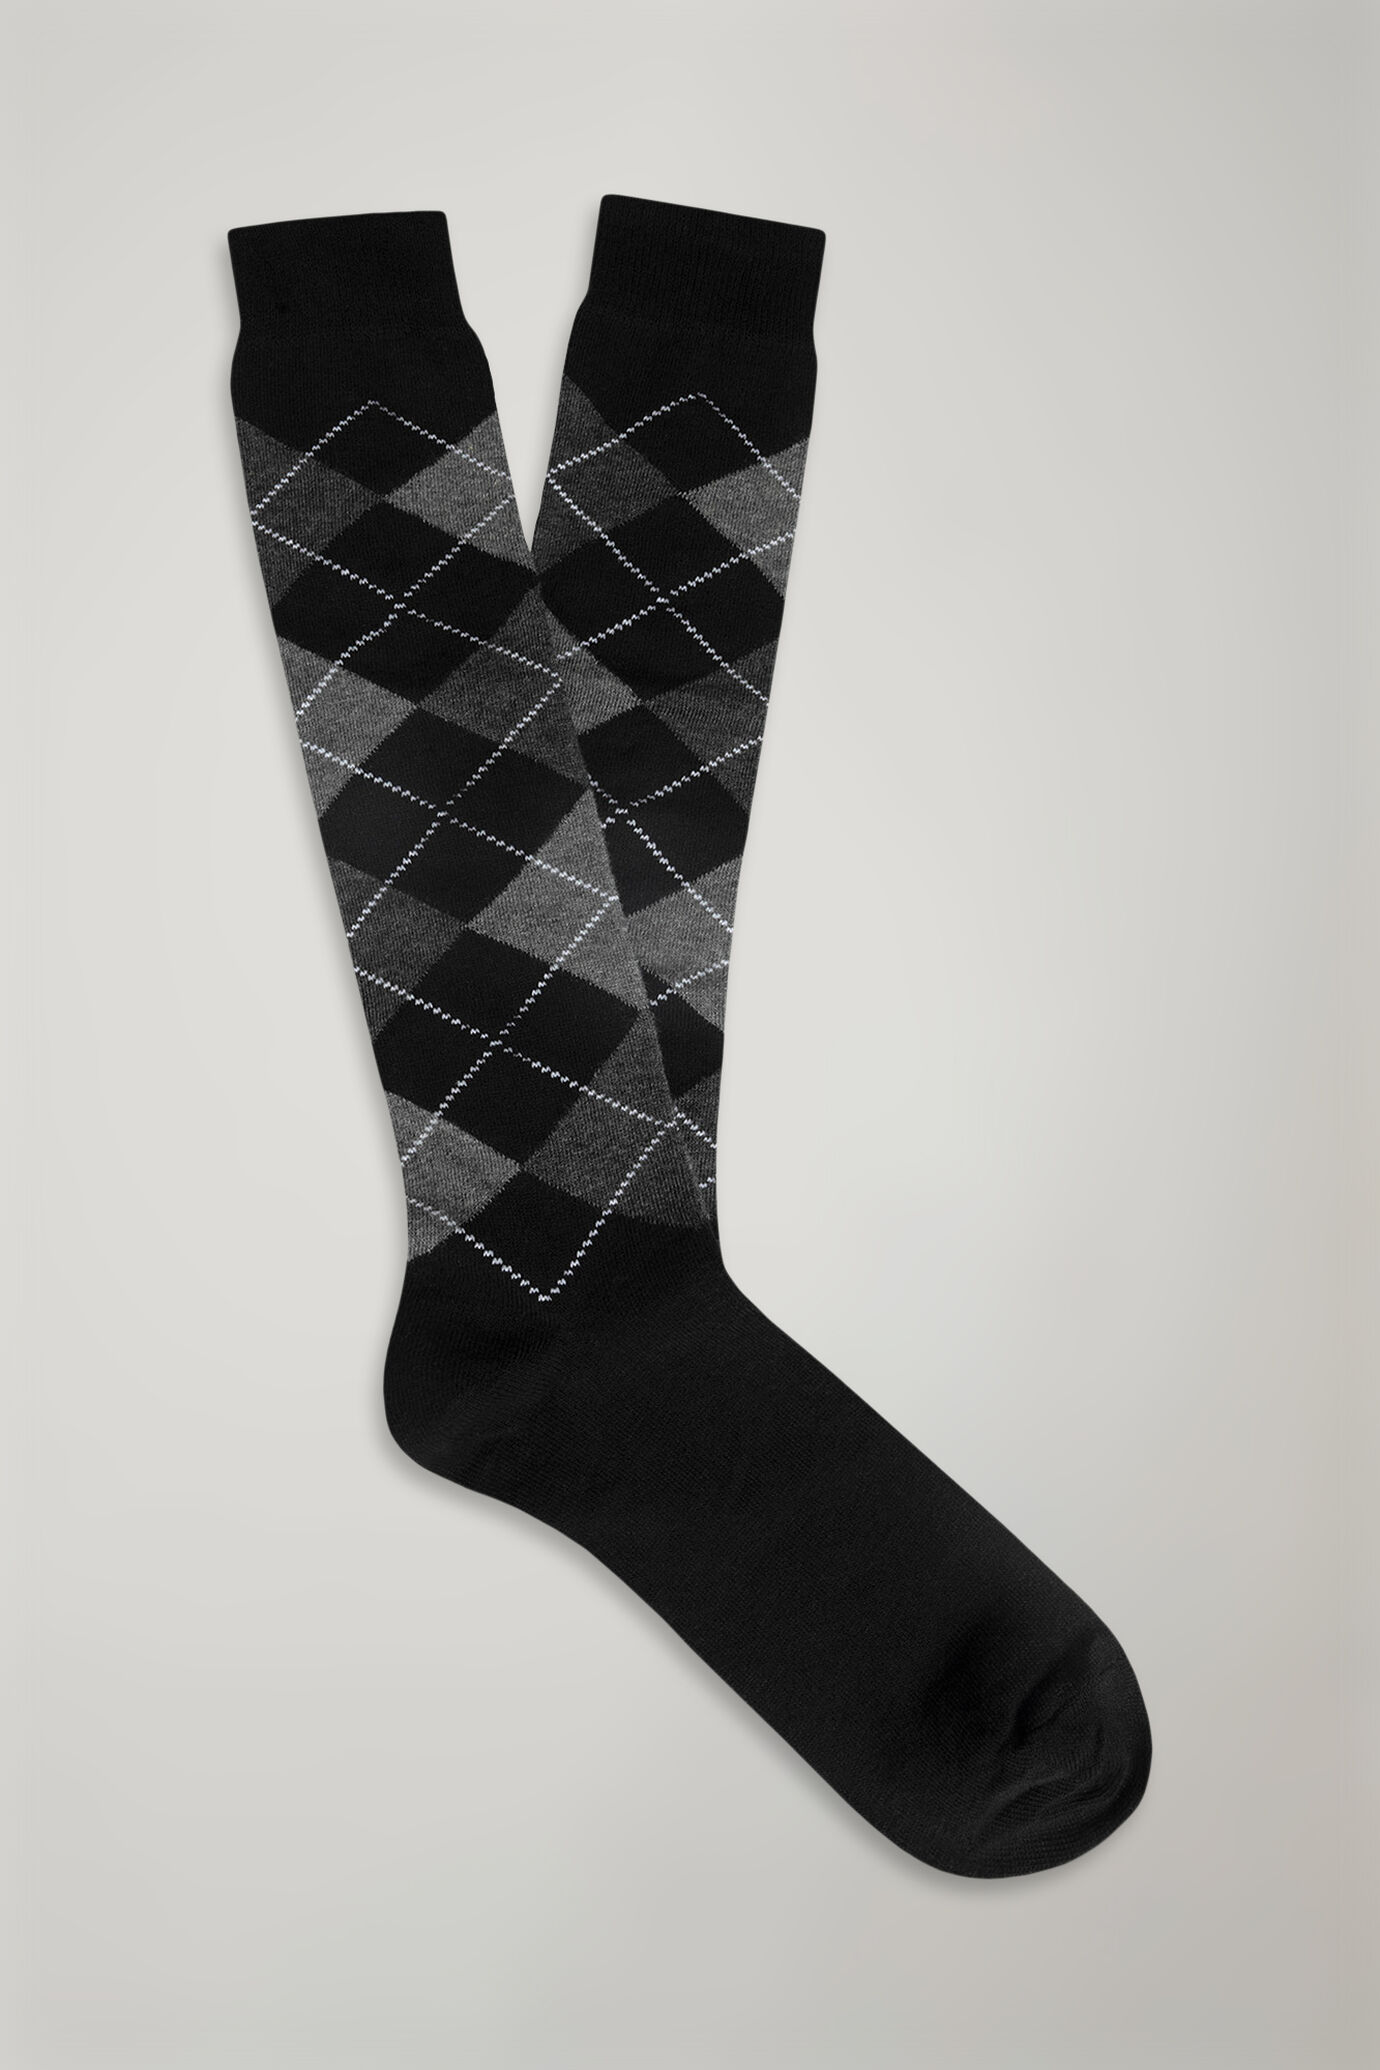 Men's knitted long socks with rhombuses pattern made in Italy